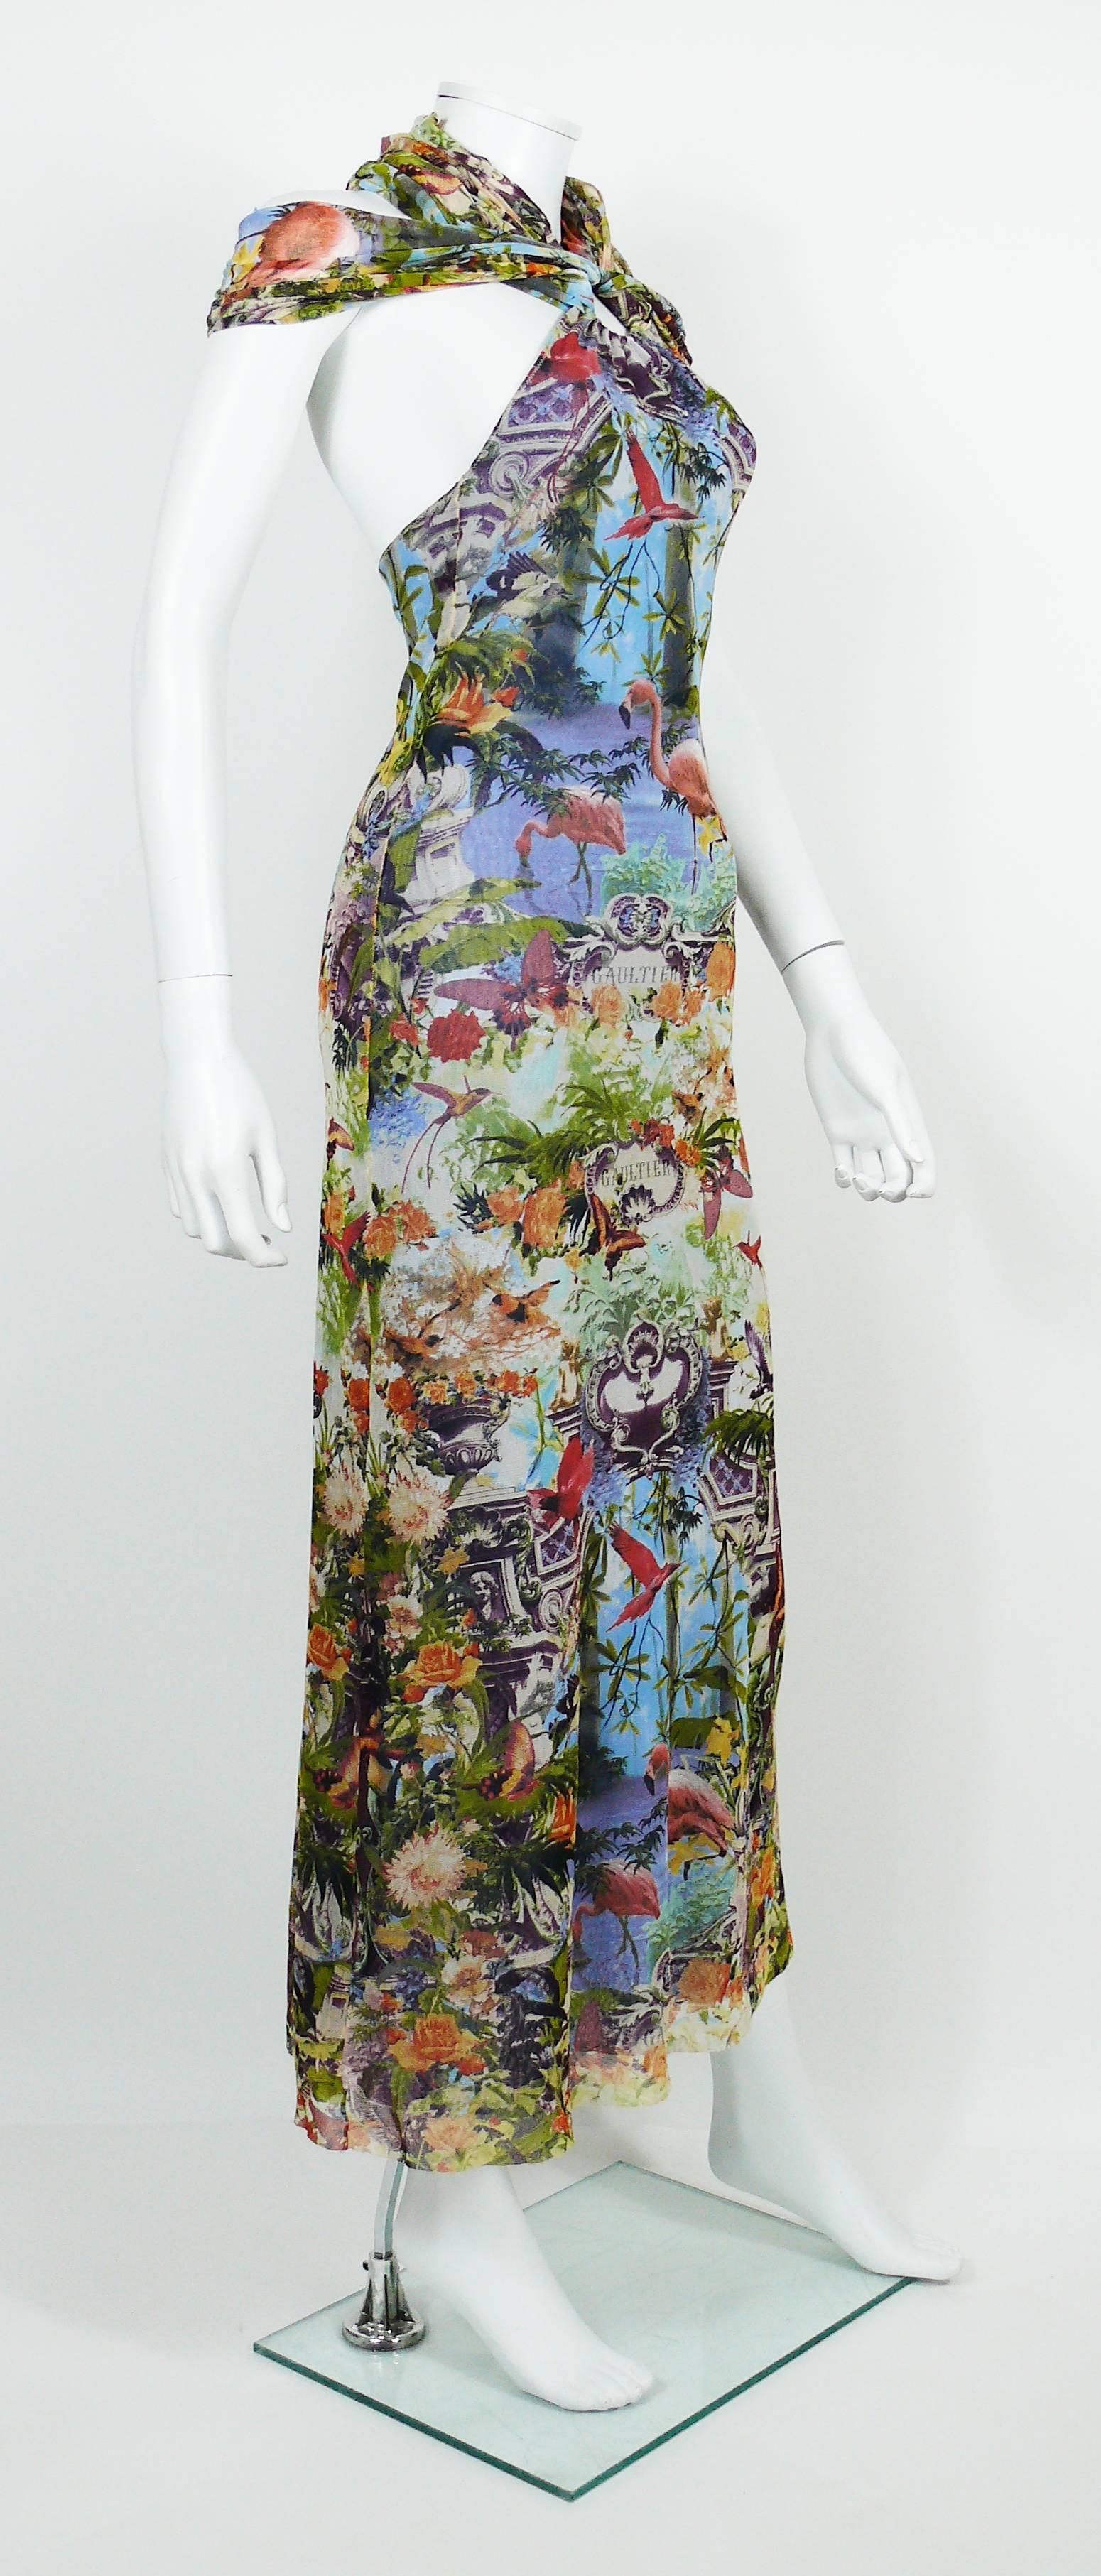 JEAN PAUL GAULTIER vintage tropical print sheer FUZZI mesh dress.

This dress features :
- Multicolored tropical print with flamingos, butterflies, birds and architectural elements.
- Maxi length.
- Halter ring neckline that can be worn in different